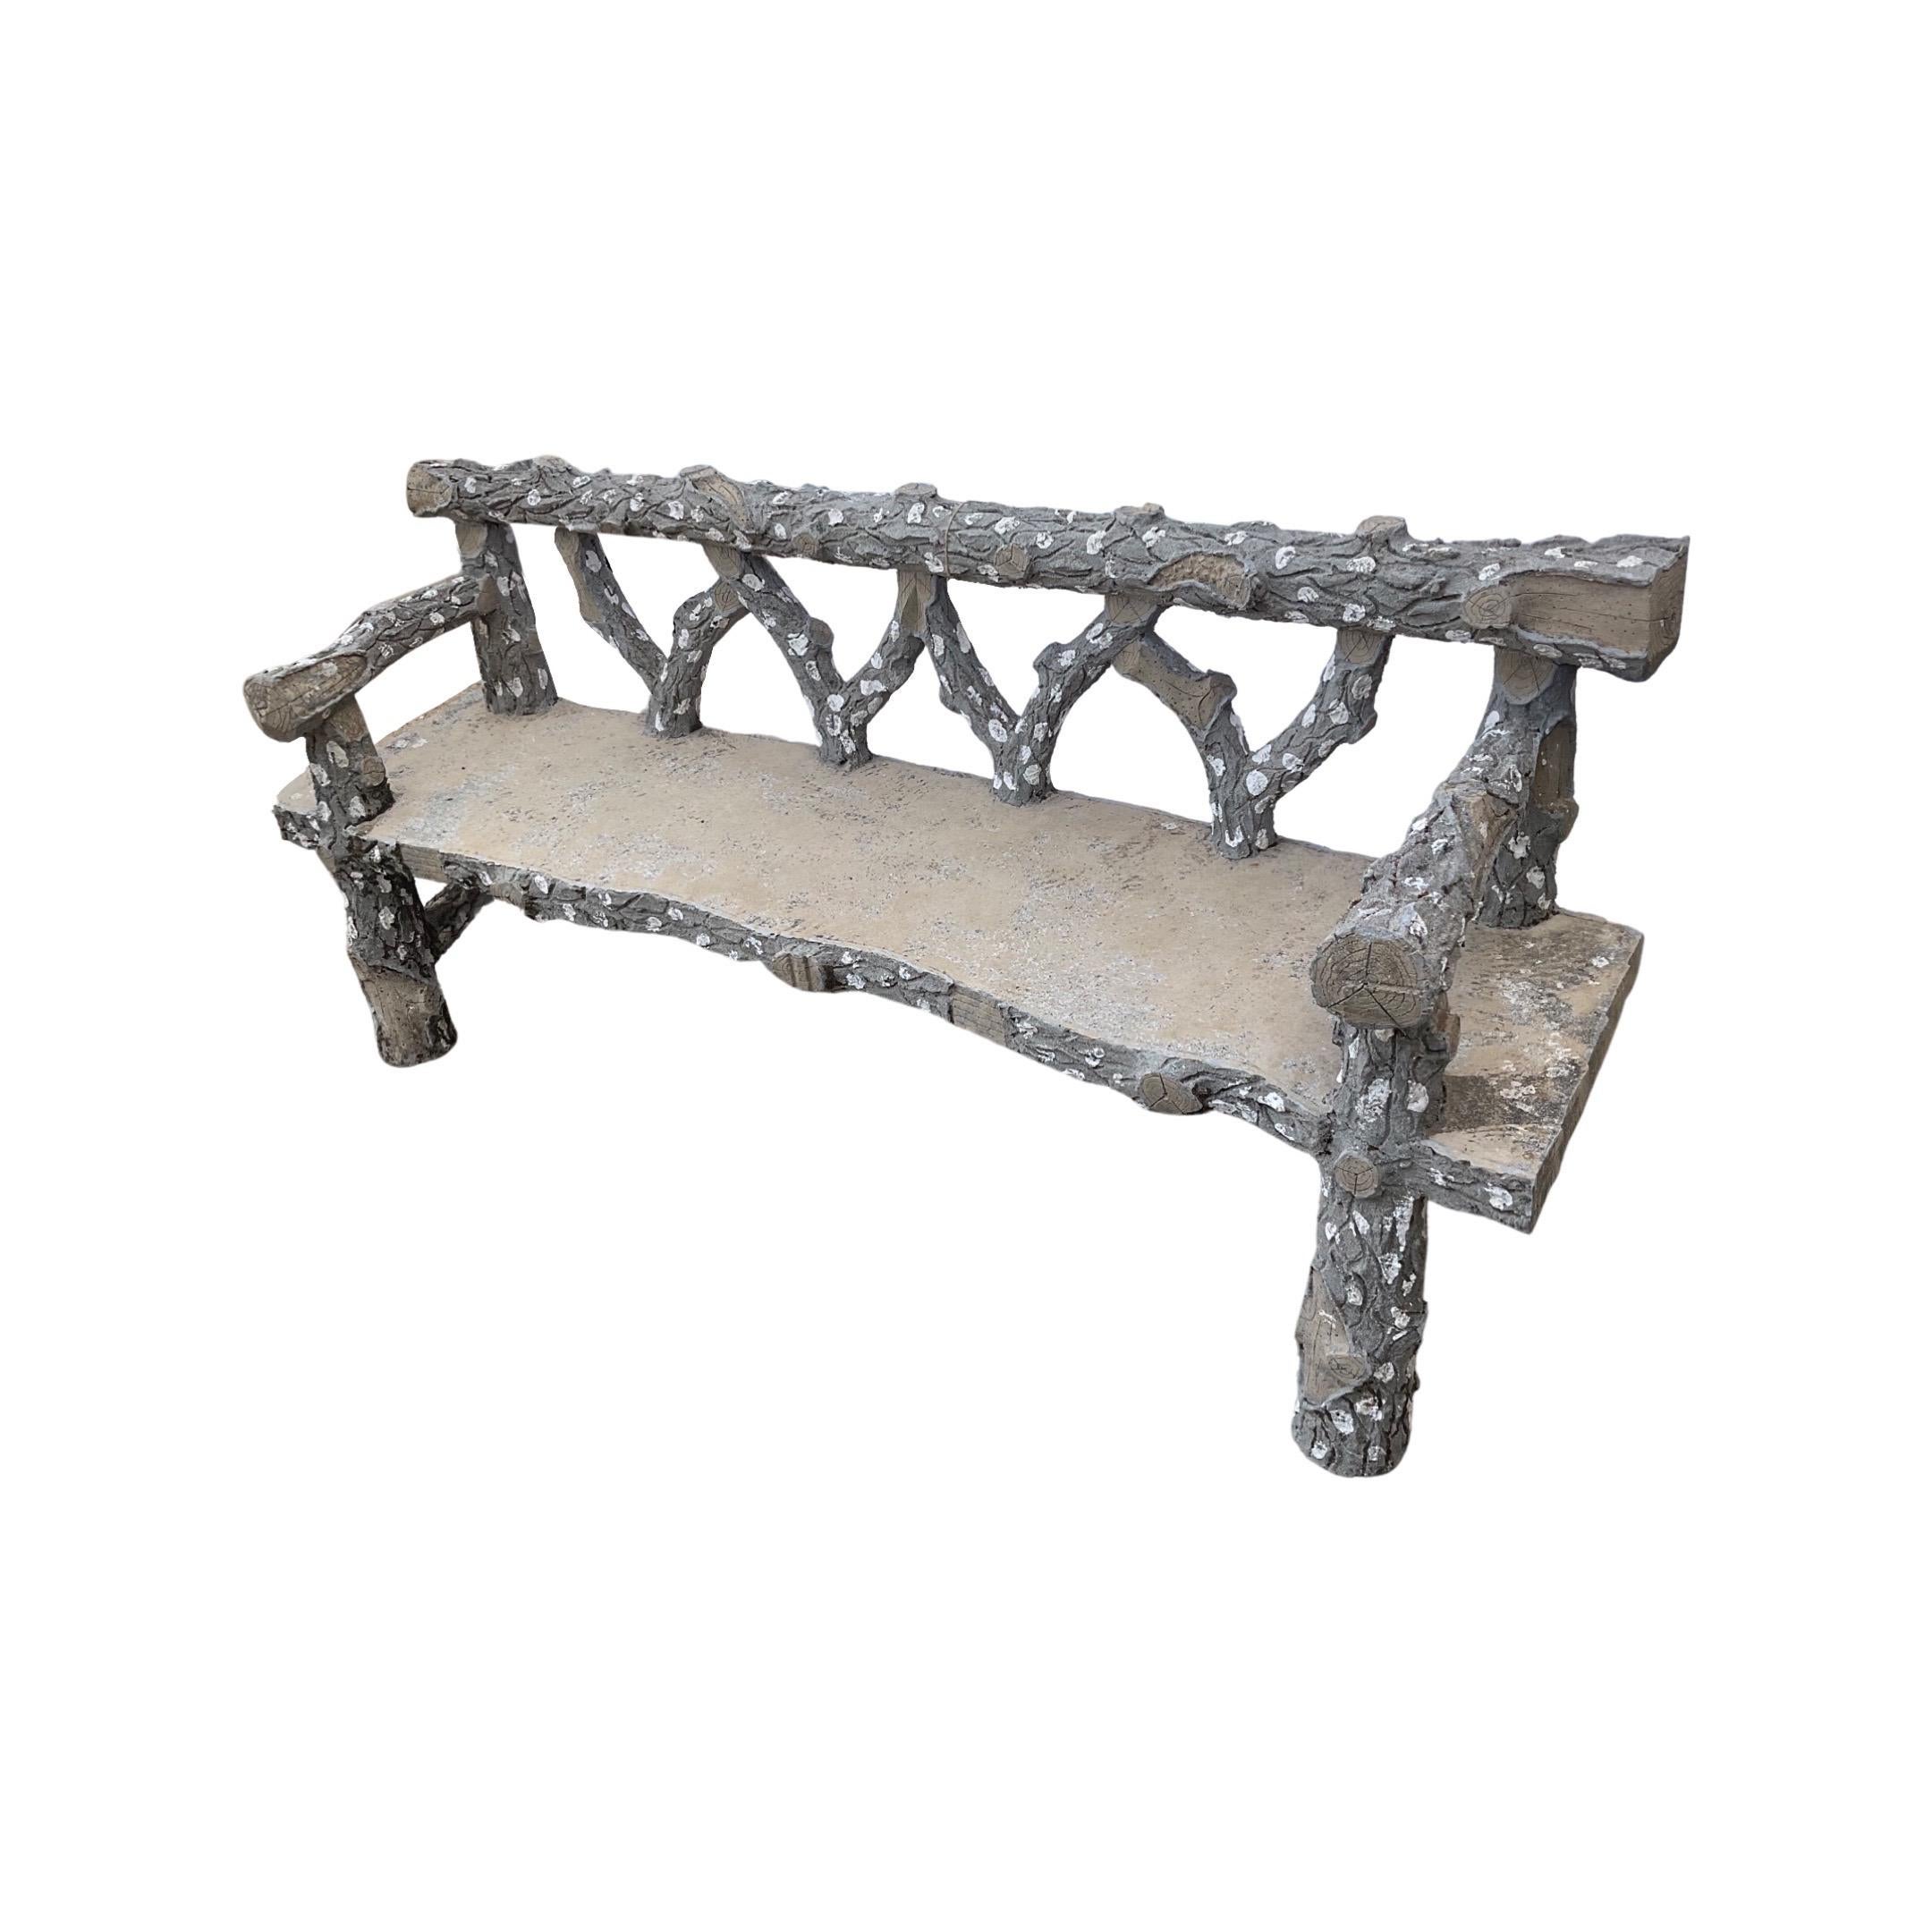 The French Faux Bois Bench from 1920 is crafted from Faux Bois, giving a one-of-a-kind natural look. This unique bench is a rare find, perfect for adding a touch of sophistication to any space.